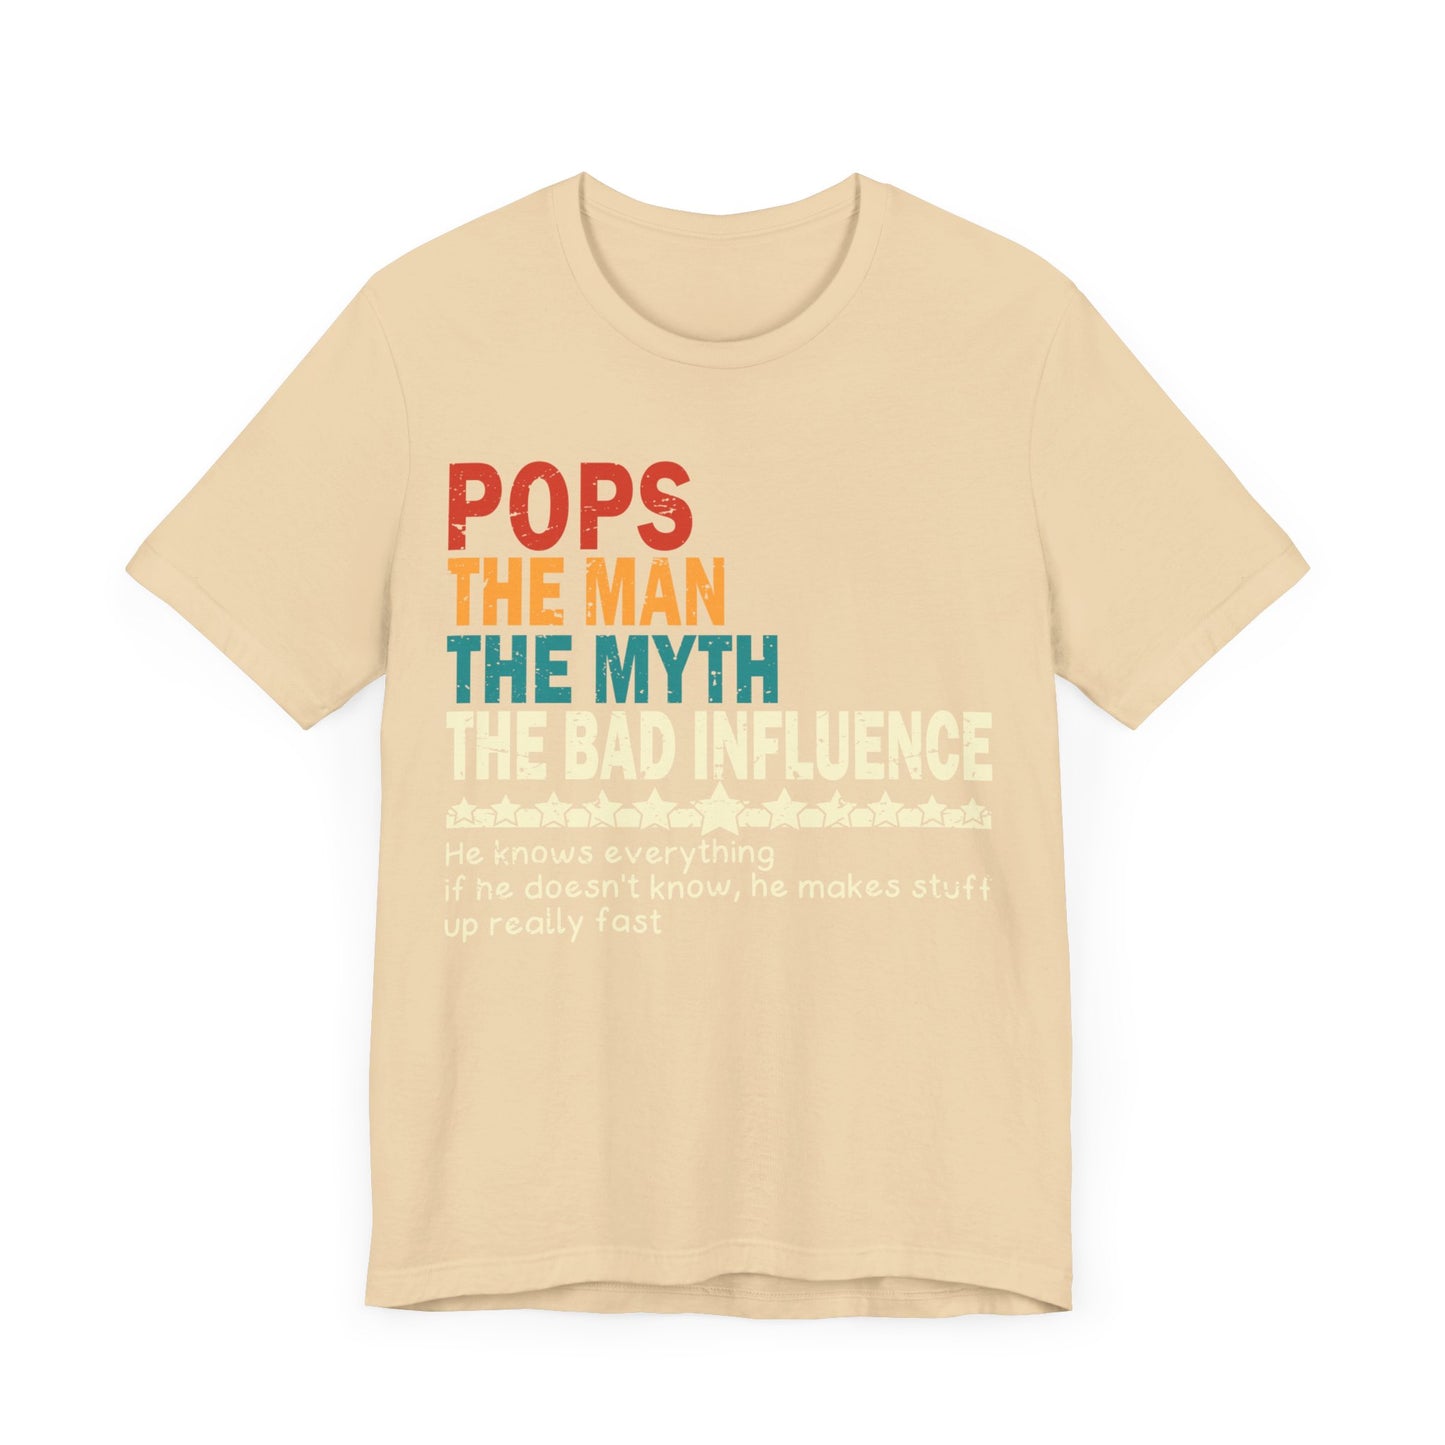 Pops The Man The Myth The Bad Influence T-shirt